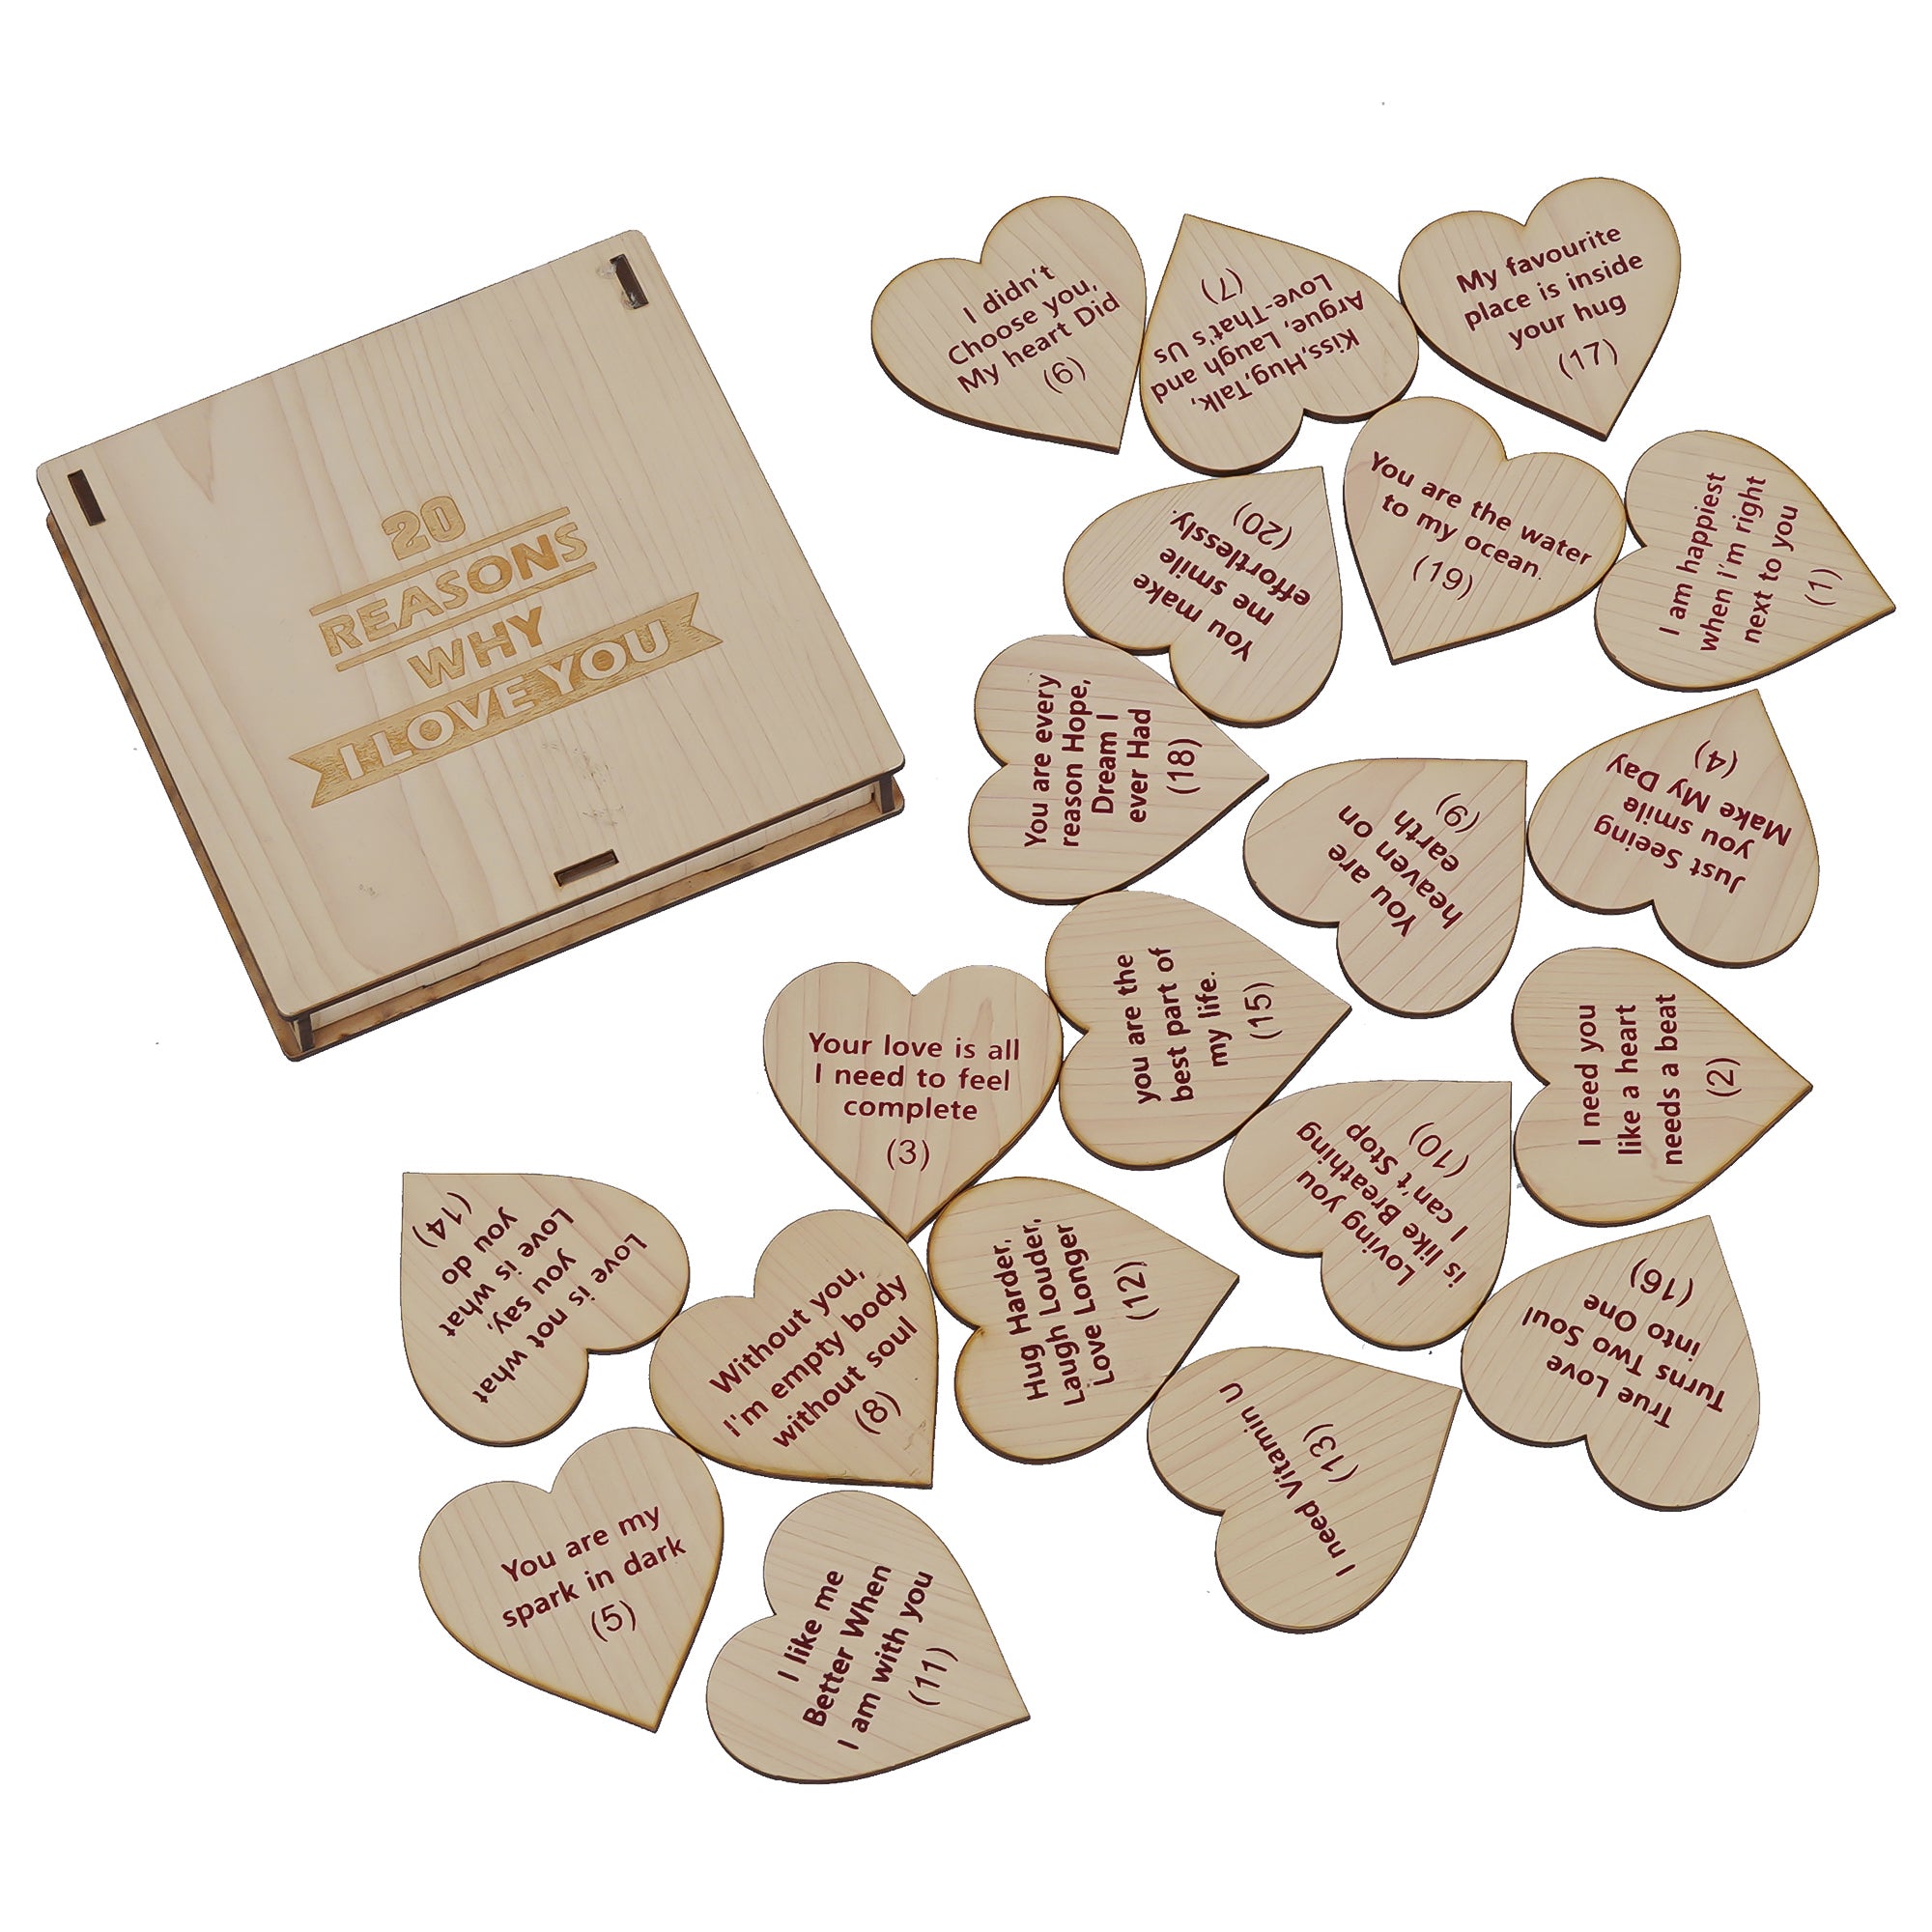 "20 Reasons Why I Love You" Printed on Little Hearts Valentine Brown Wooden Gift Set 6